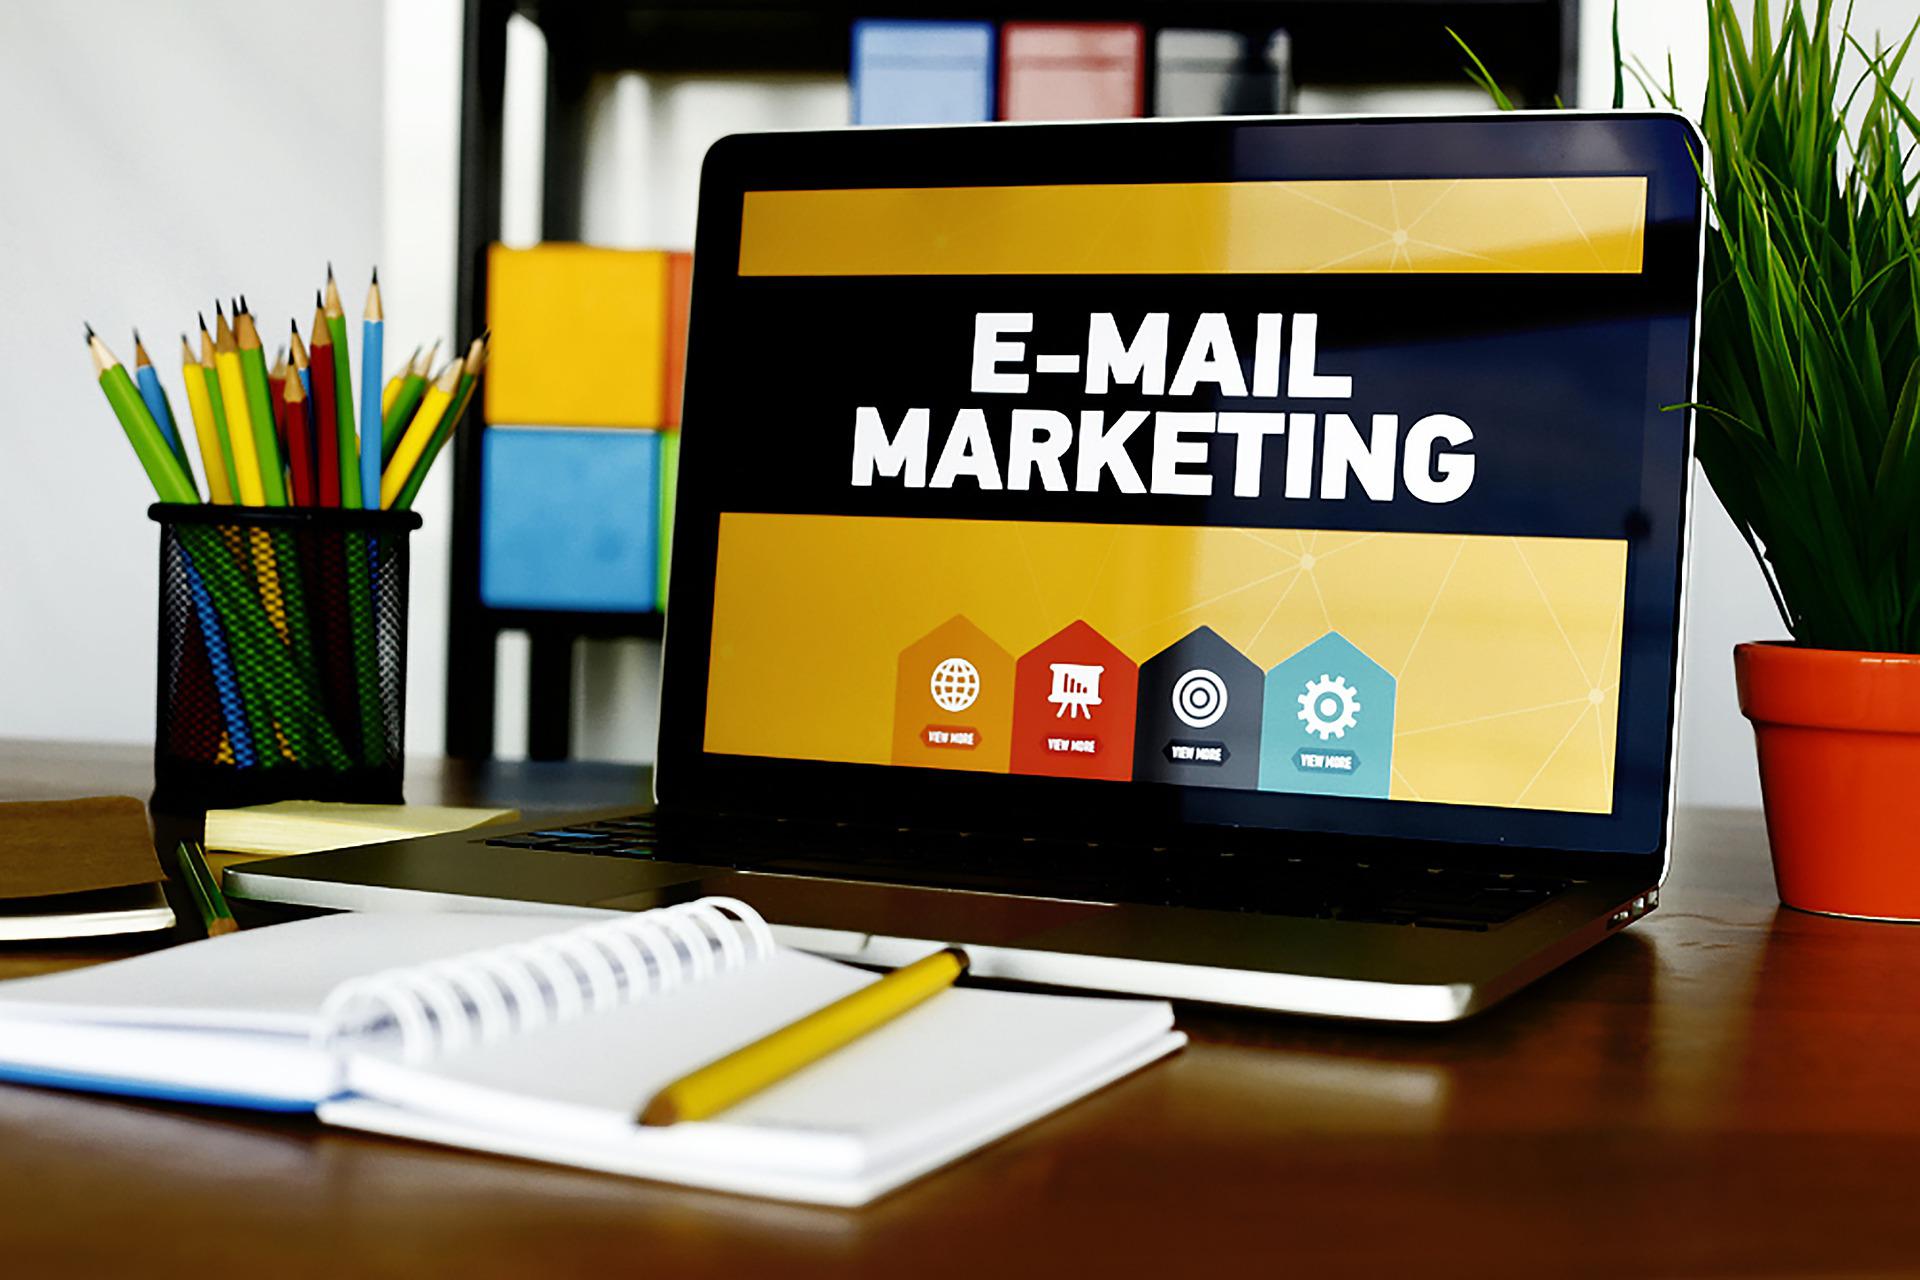 What Are the Dos and Don’ts of Email Marketing?